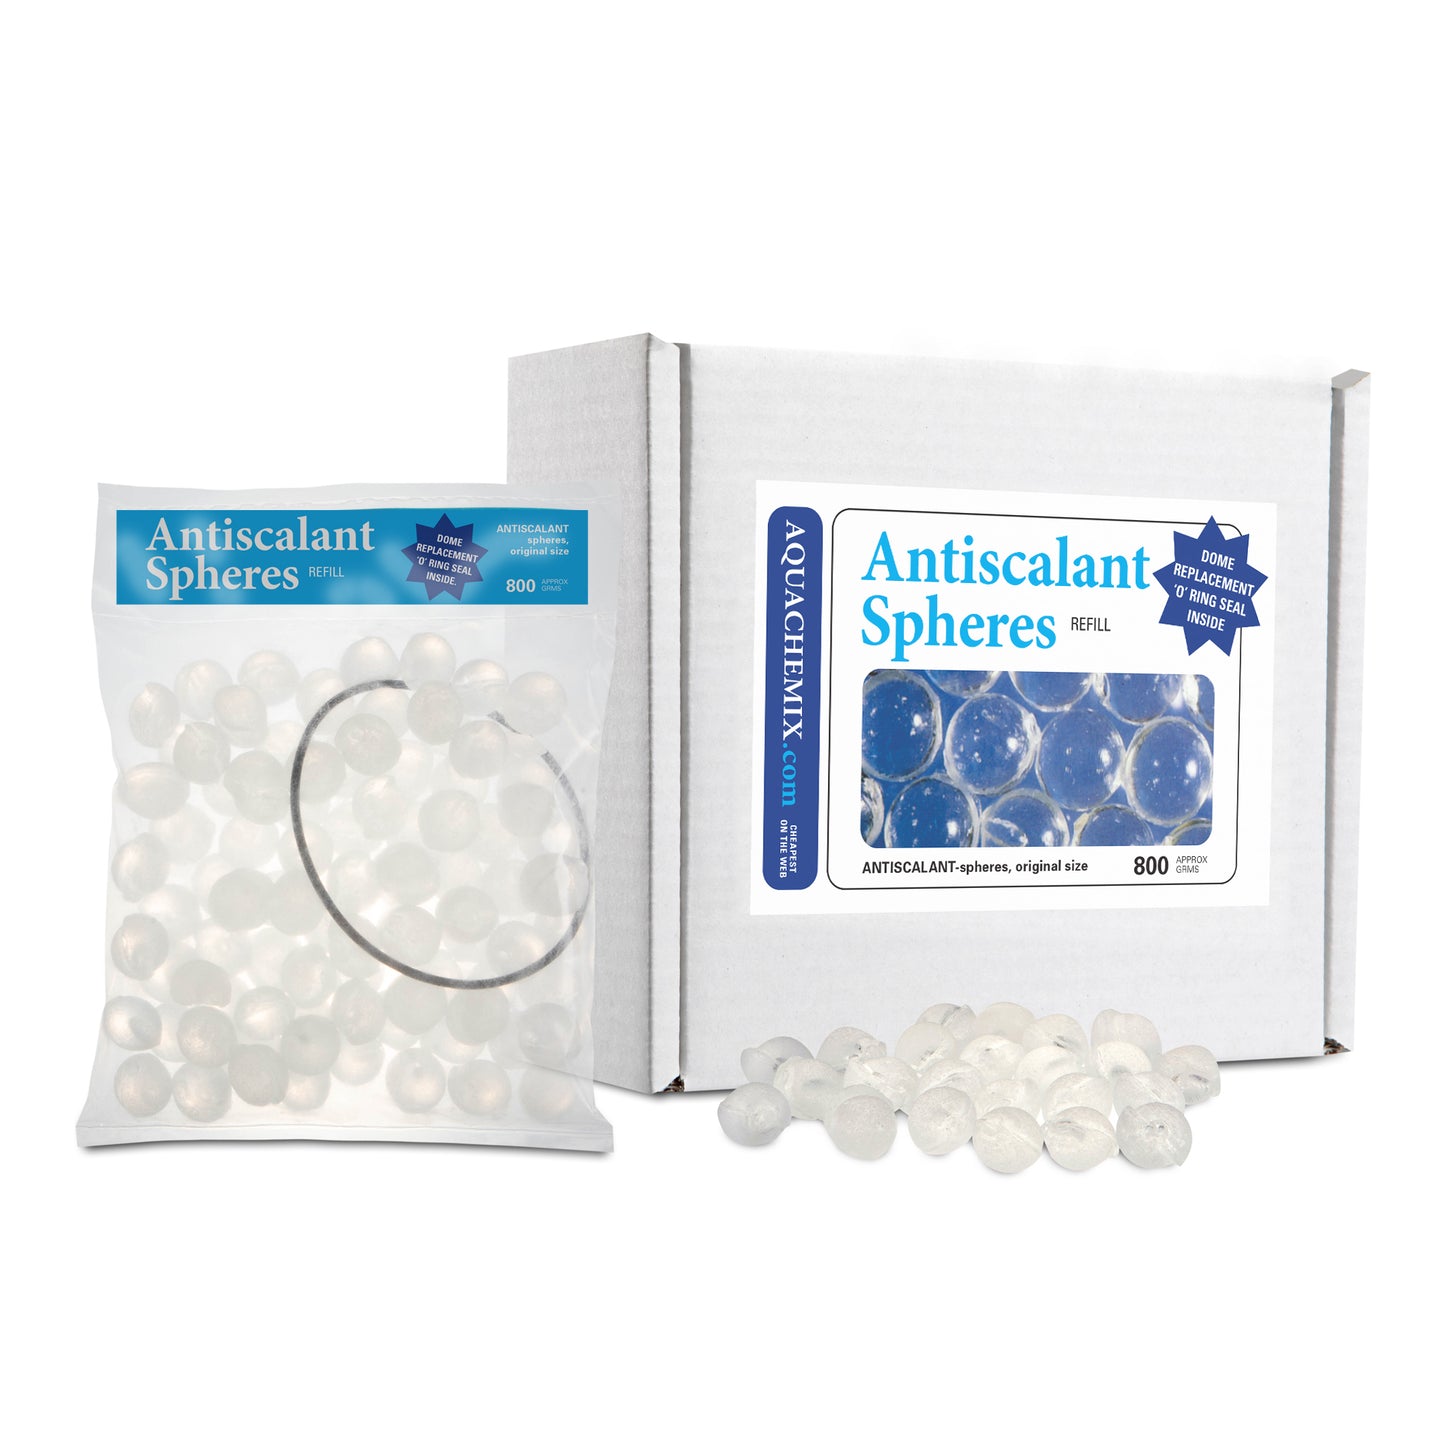 3 x Antiscalant Spheres (Siliphos) Refill Pack 800g